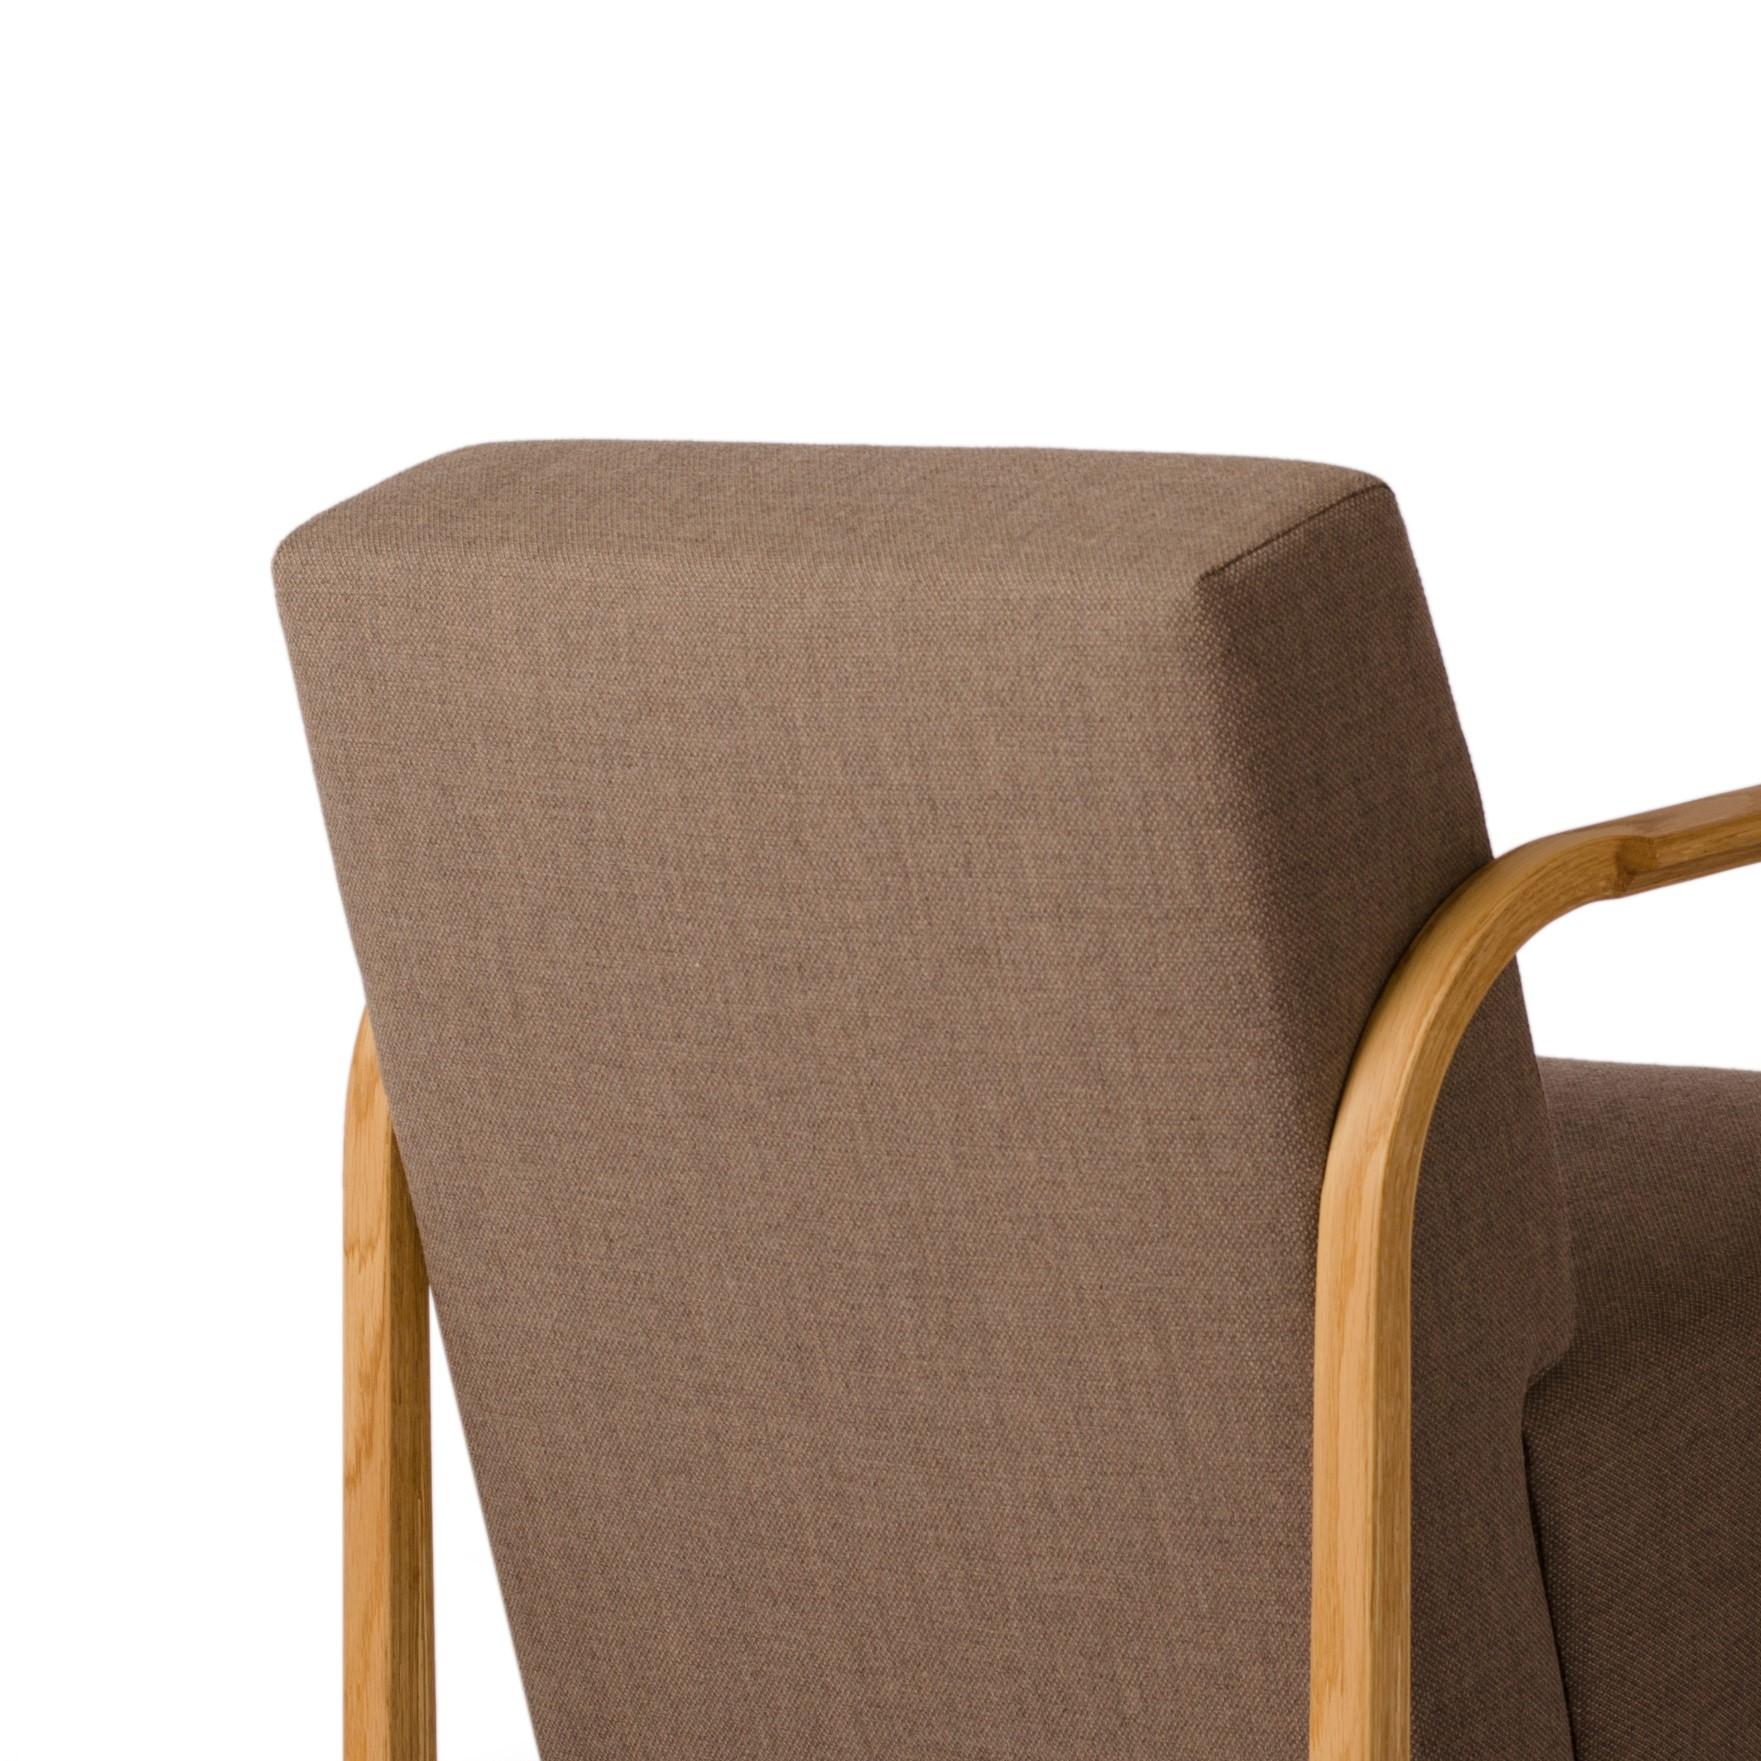 Other Set of 2 Kvadrat/Hallingdal & Fiord Arch Lounge Chairs by Mazo Design